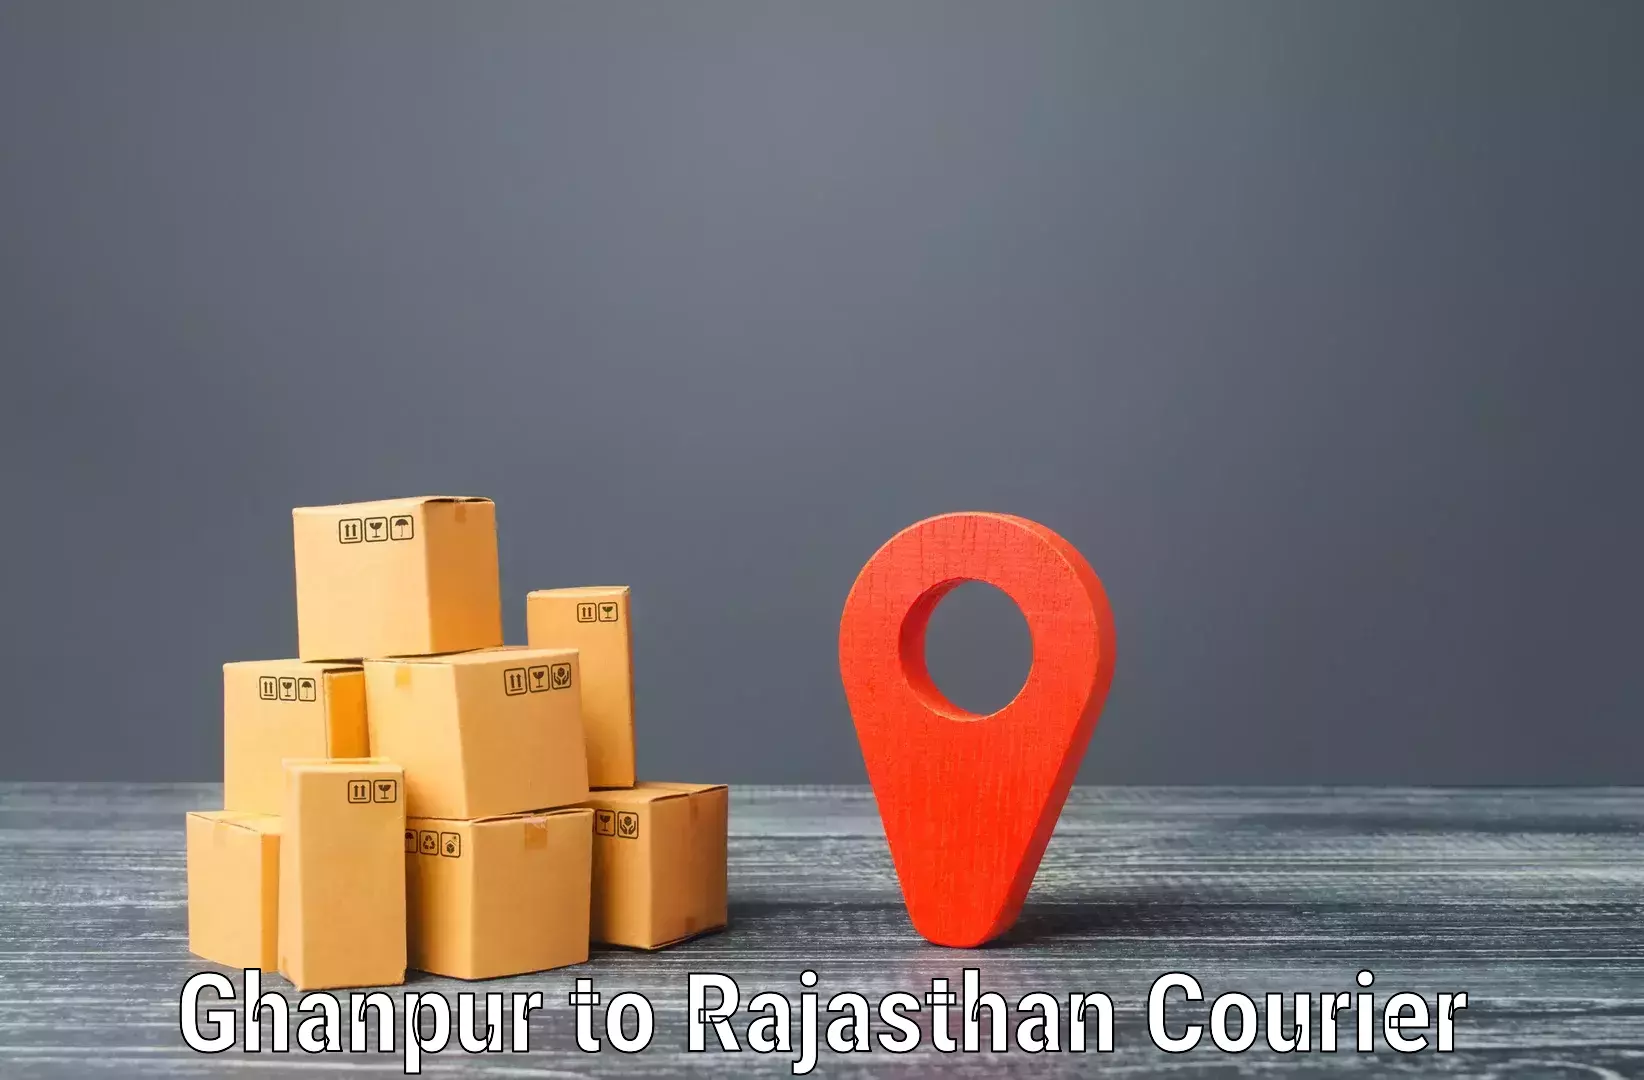 Customizable delivery plans Ghanpur to Sirohi